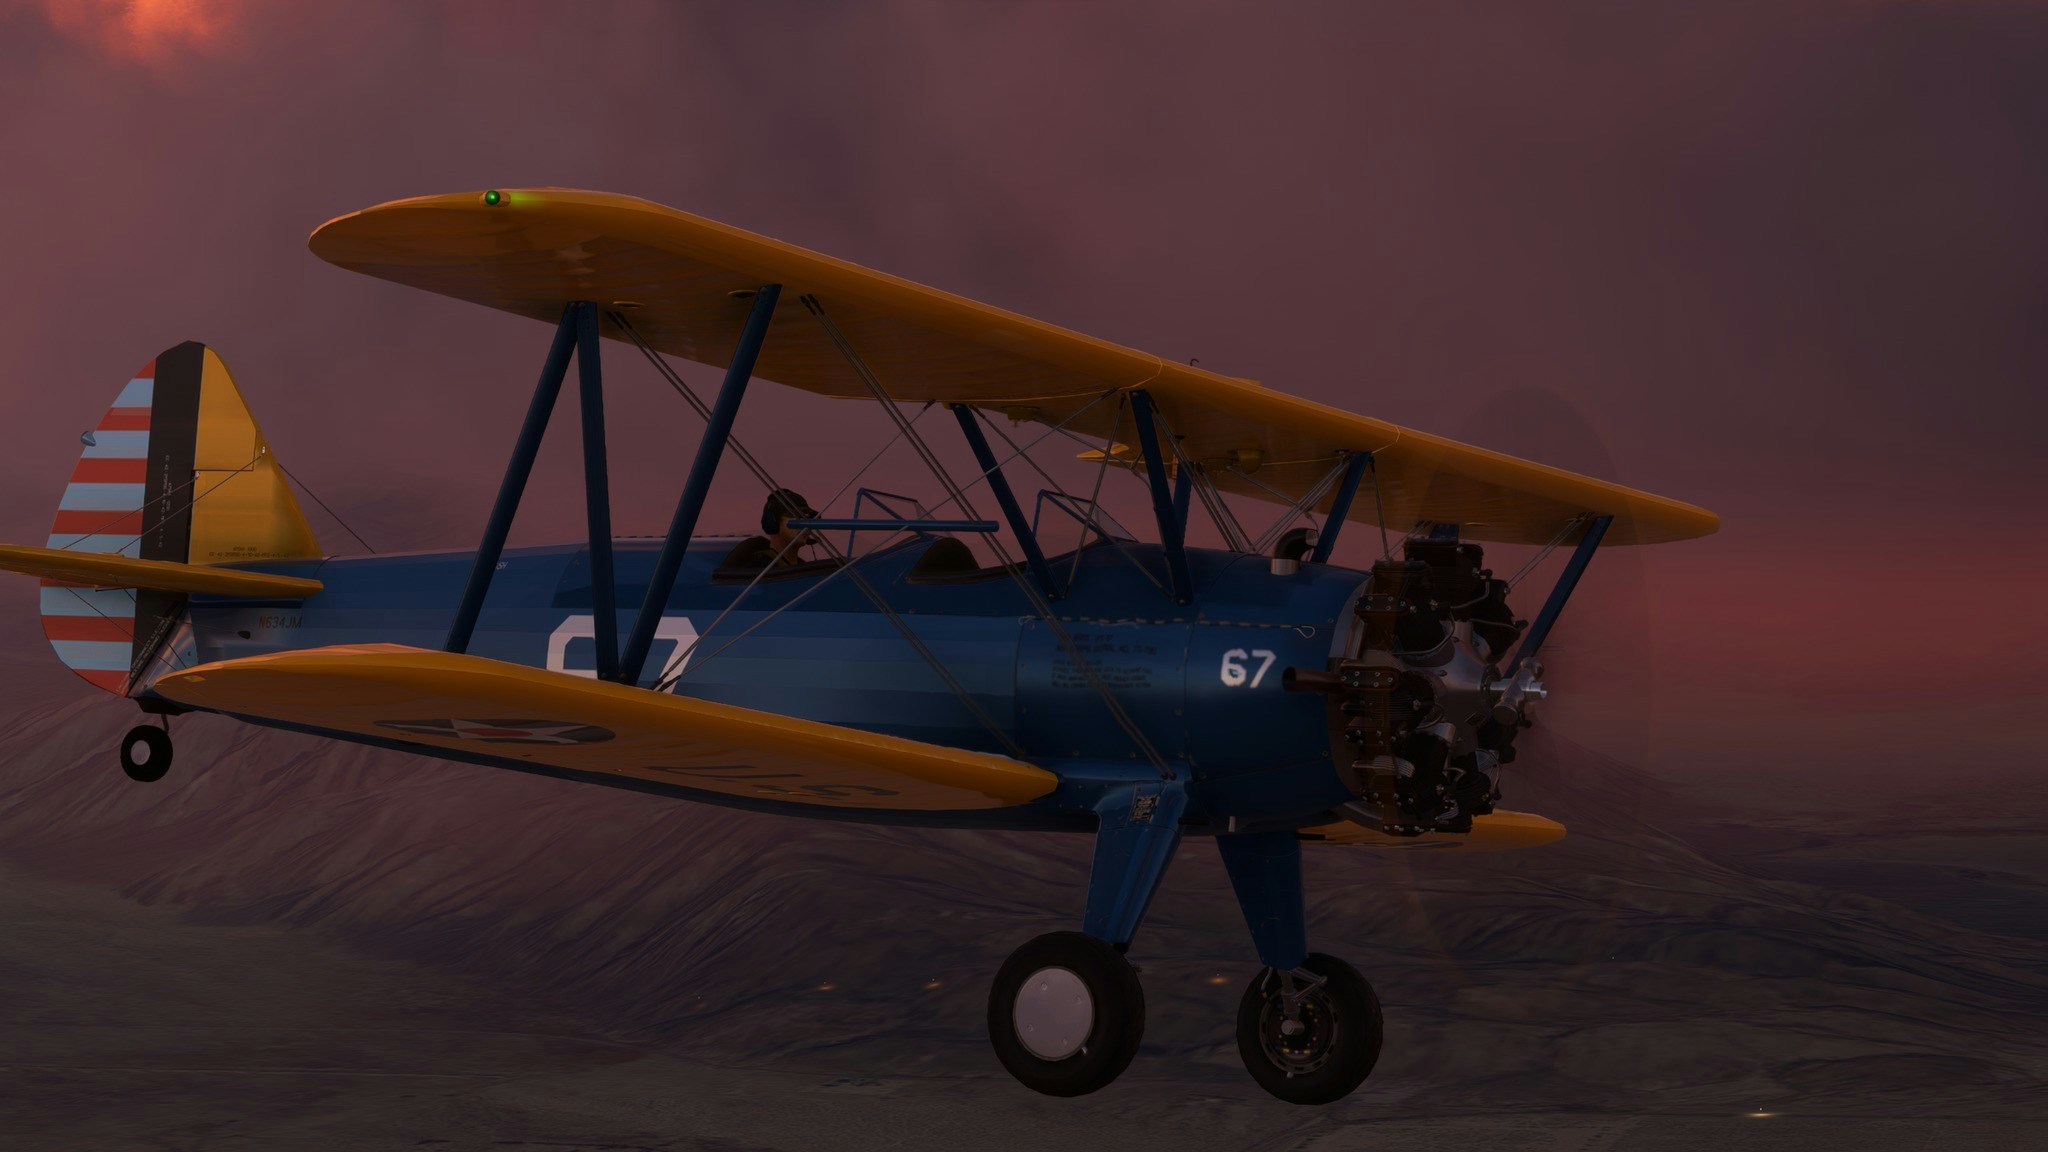 Golden Age Simulations Previews Upcoming Boeing Stearman Model 75